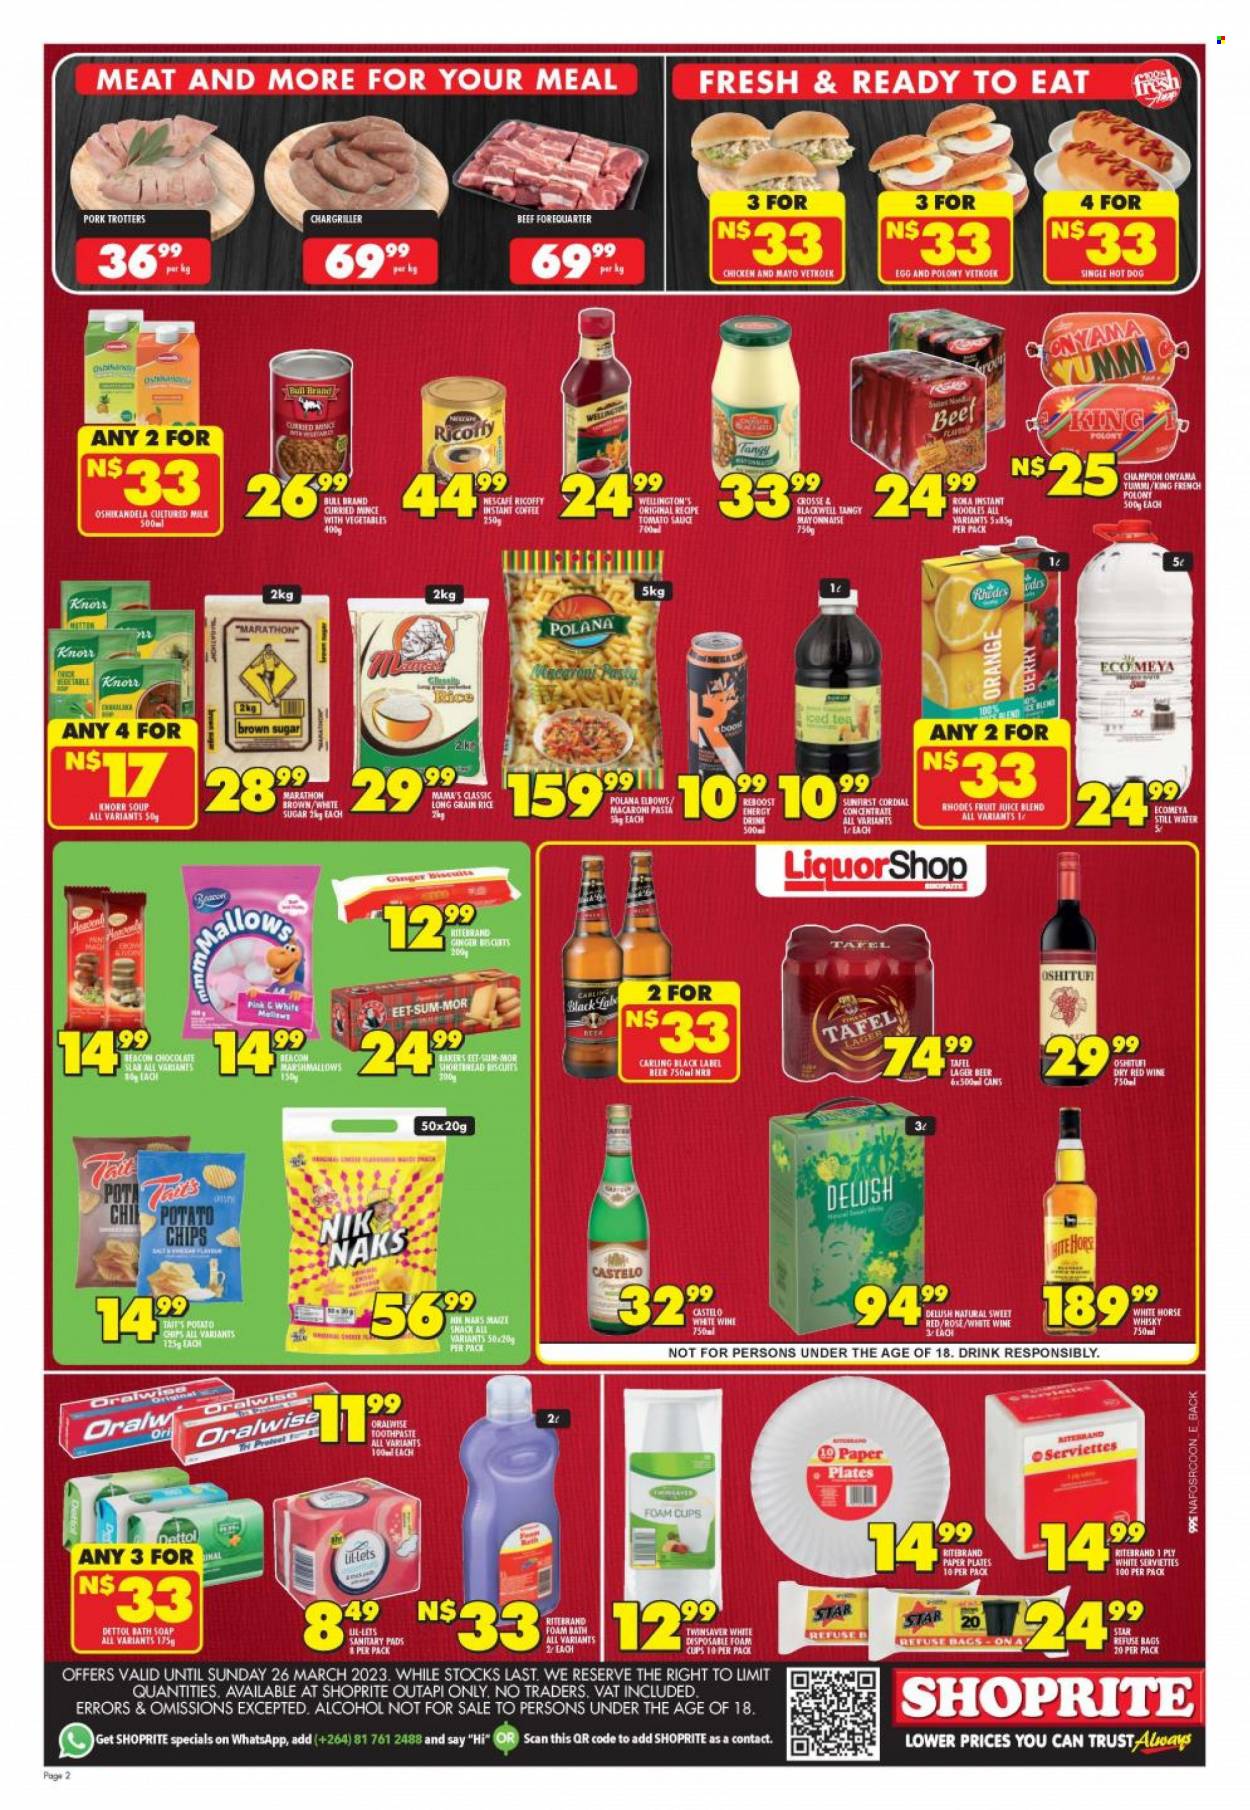 thumbnail - Shoprite catalogue  - 16/03/2023 - 26/03/2023 - Sales products - ginger, oranges, hot dog, macaroni, soup, pasta, instant noodles, Knorr, sauce, noodles, Mama's, french polony, polony, milk, eggs, mayonnaise, marshmallows, chocolate, snack, biscuit, potato chips, chips, maize snack, Nik Naks, cane sugar, tomato sauce, rice, long grain rice, energy drink, fruit juice, juice, ice tea, water, Boost, coffee, instant coffee, Ricoffy, Nescafé, alcohol, rosé wine, whisky, beer, Carling, Lager, chicken, Dettol, bath foam, soap, toothpaste, sanitary pads, Lil-lets. Page 2.